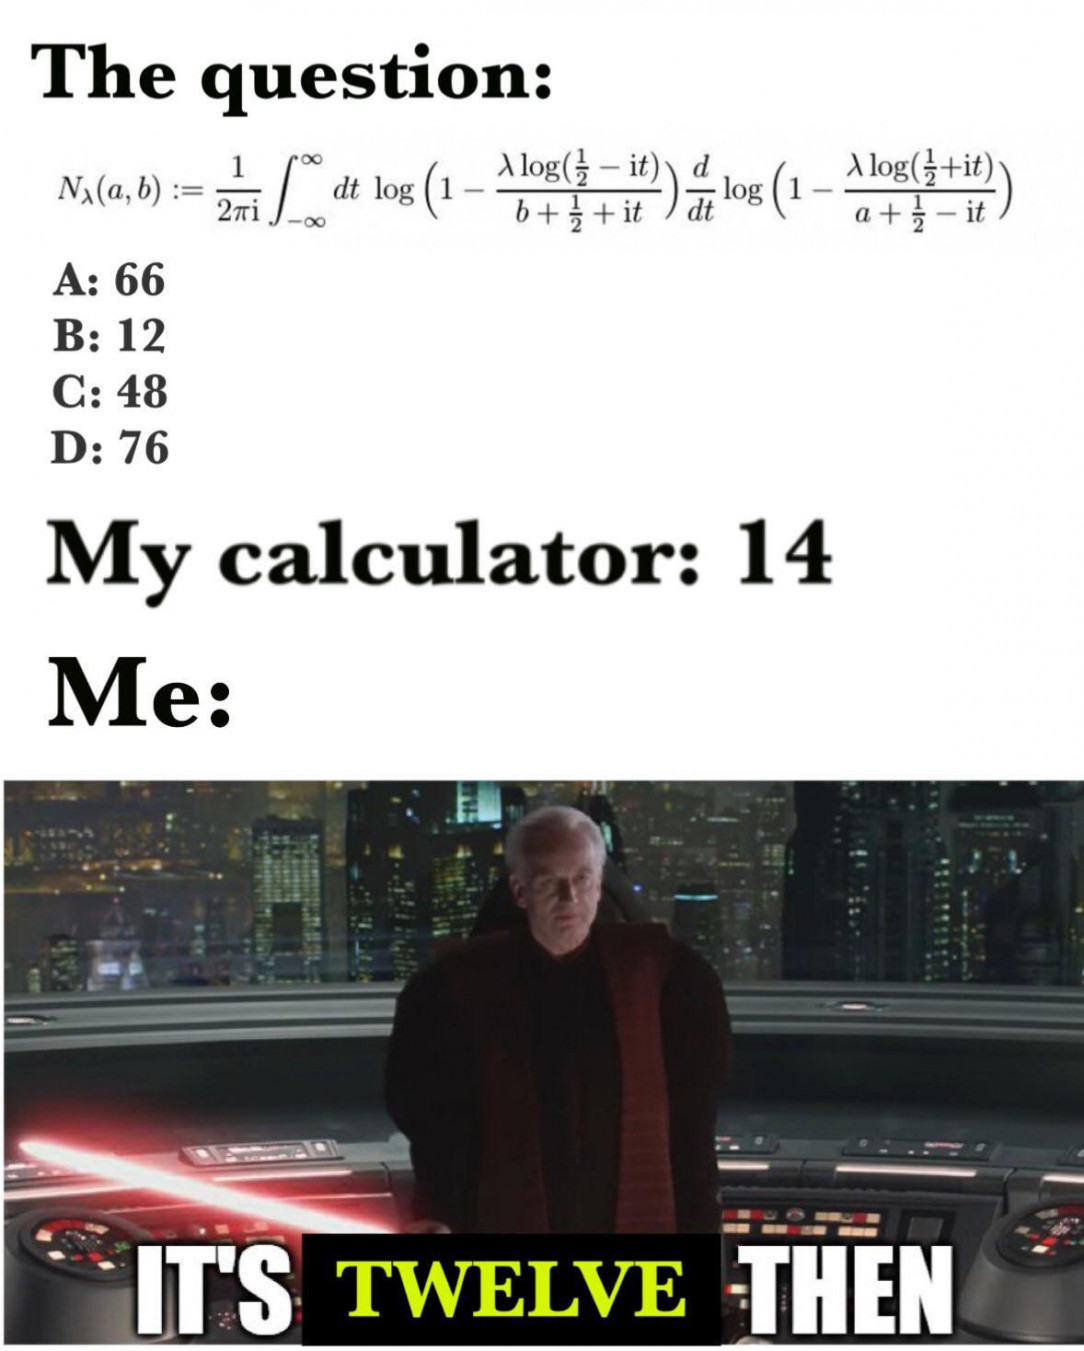 does anyone know what this equation is about? Saw it on r/memes